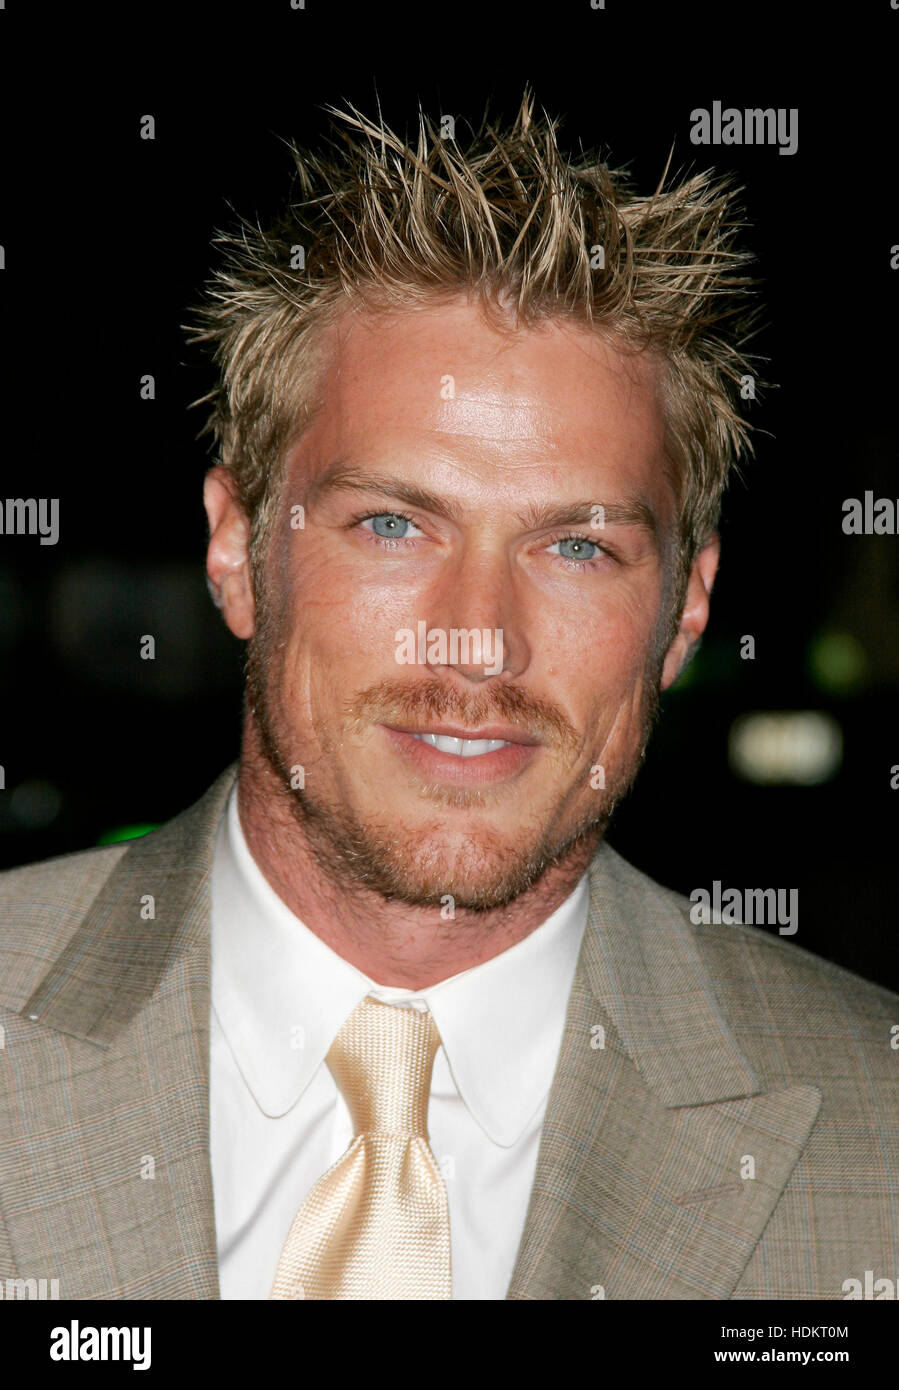 Jason Lewis at the premiere of the film, 'Alexander'' at Grauman's Chinese Theatre on November 16, 2004 in Los Angeles. Photo credit: Francis Specker Stock Photo